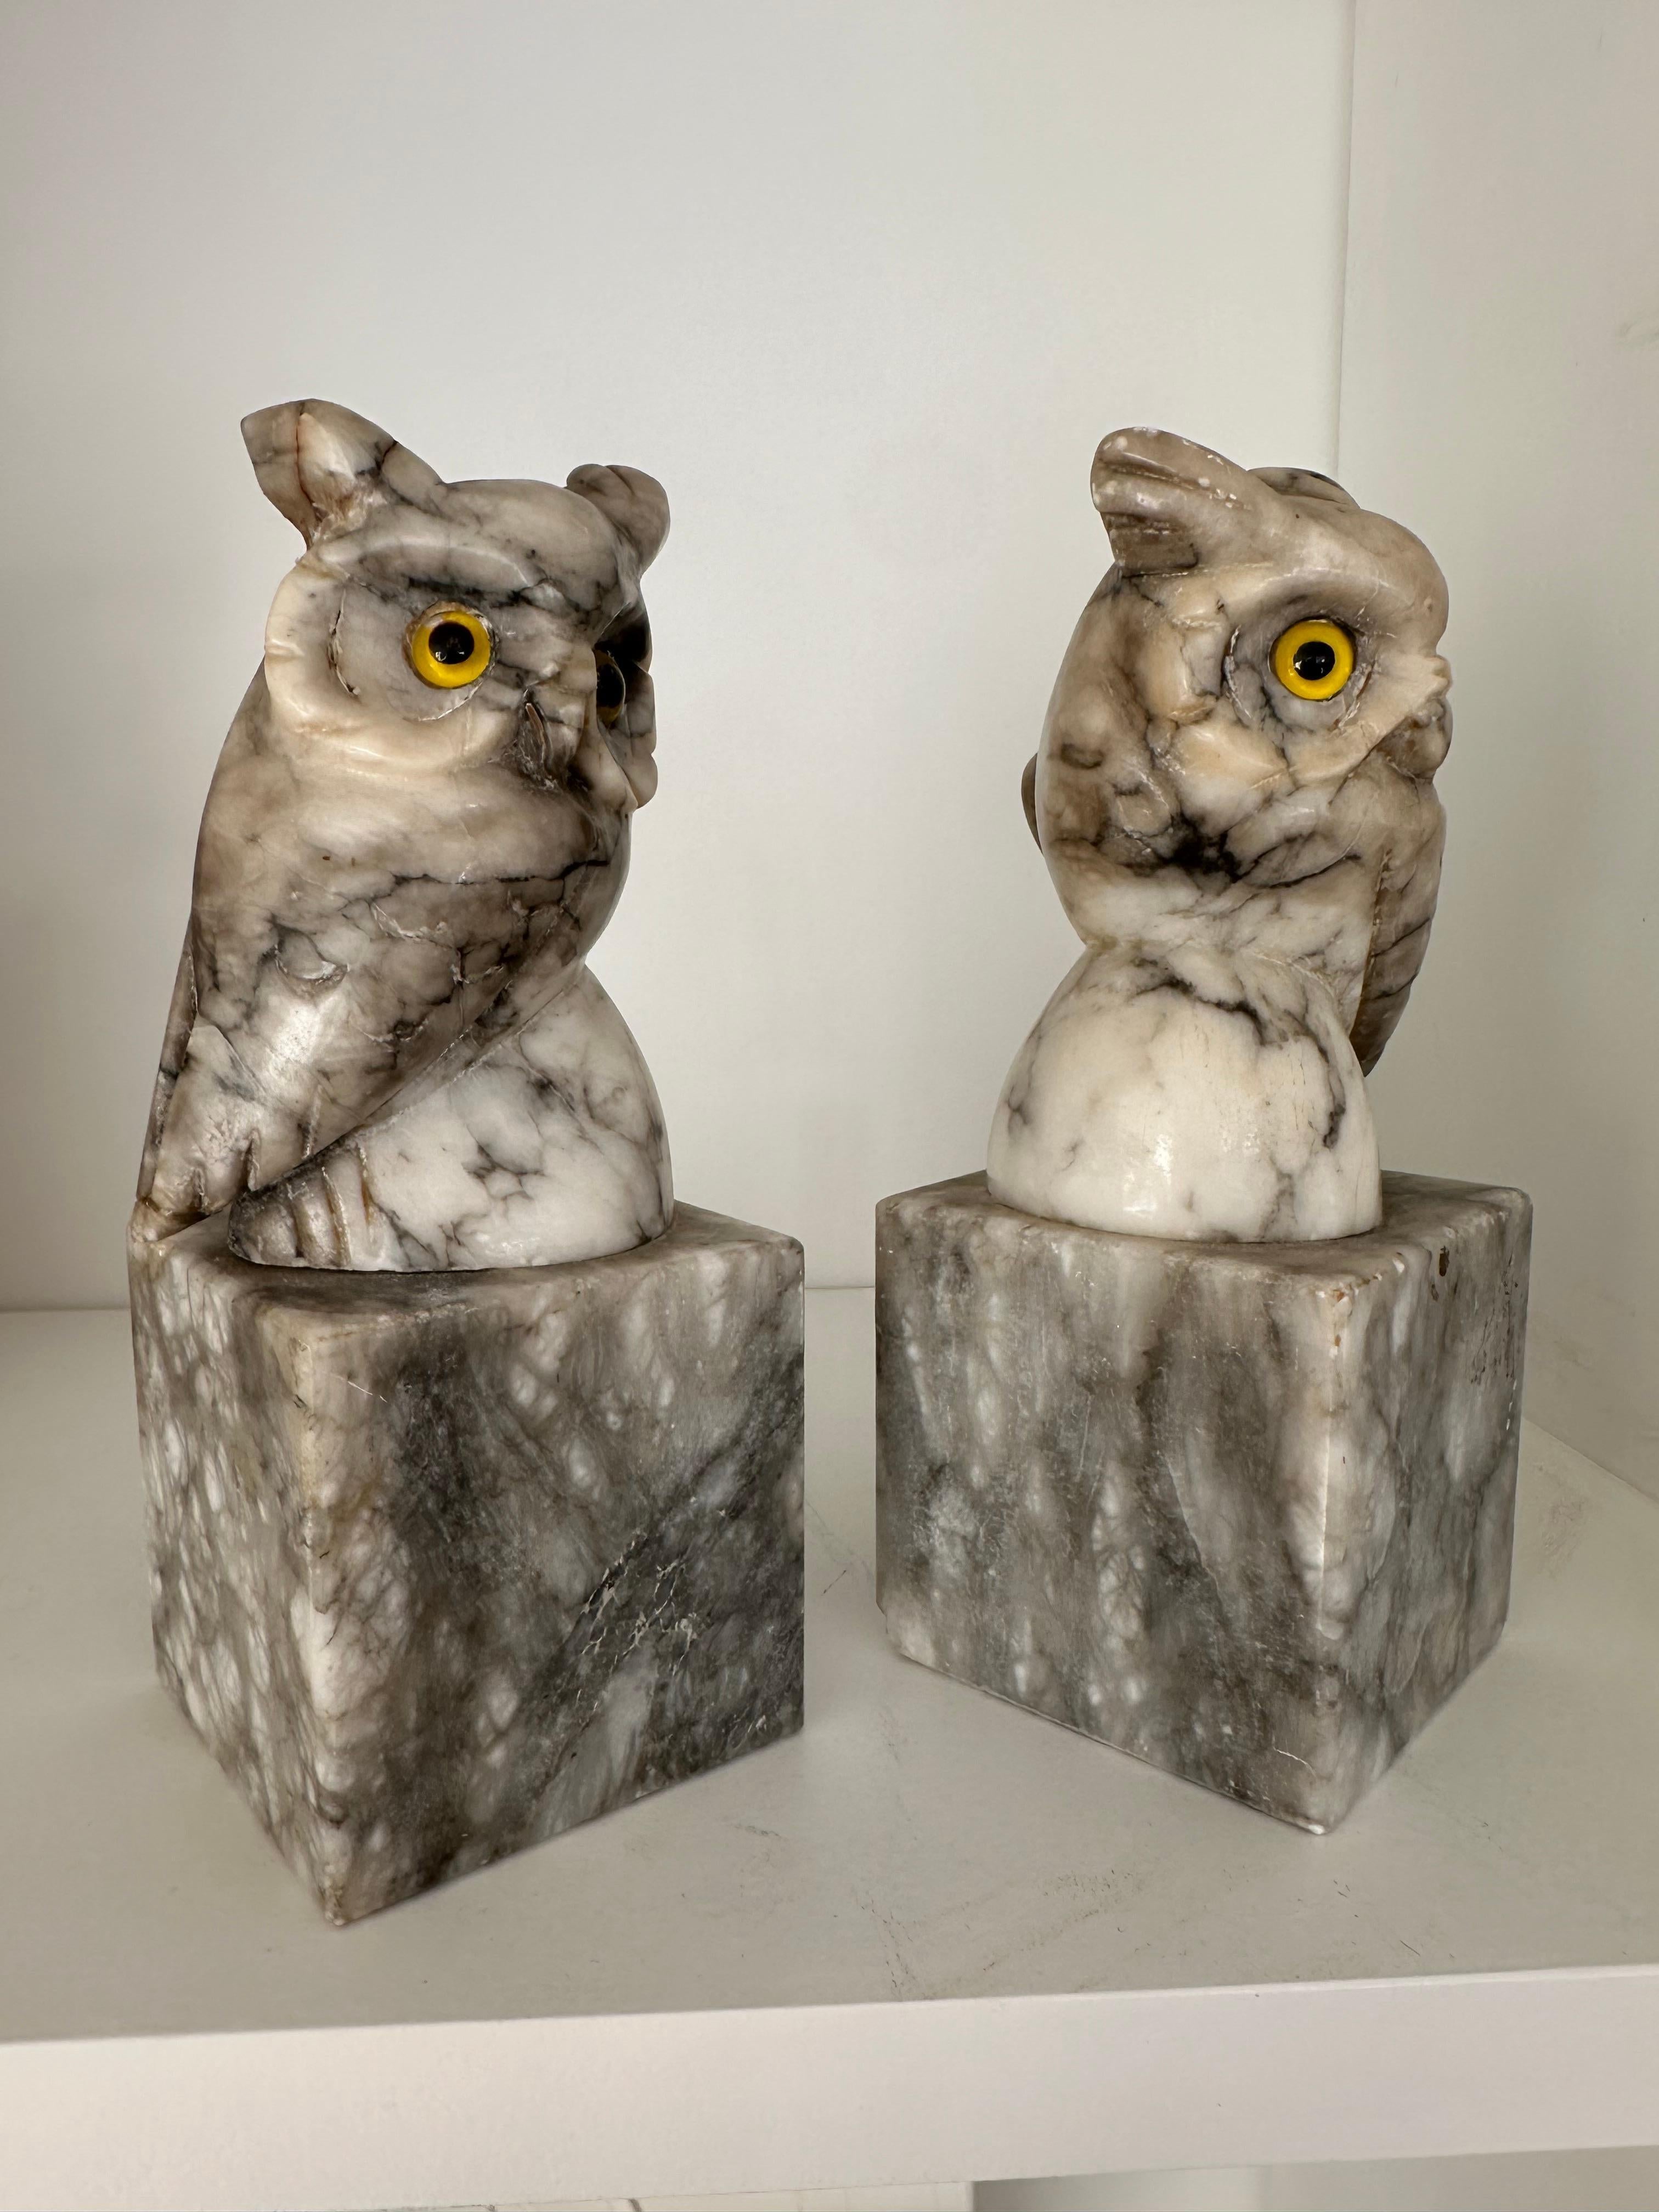 Beautiful, meaningful, practical and decorative mid-century bookends.

Given the fact that owls are the international symbol for wisdom and learning, these are the perfect sculptures for book-ends. These fine sized, hand-sculpted alabaster owls are